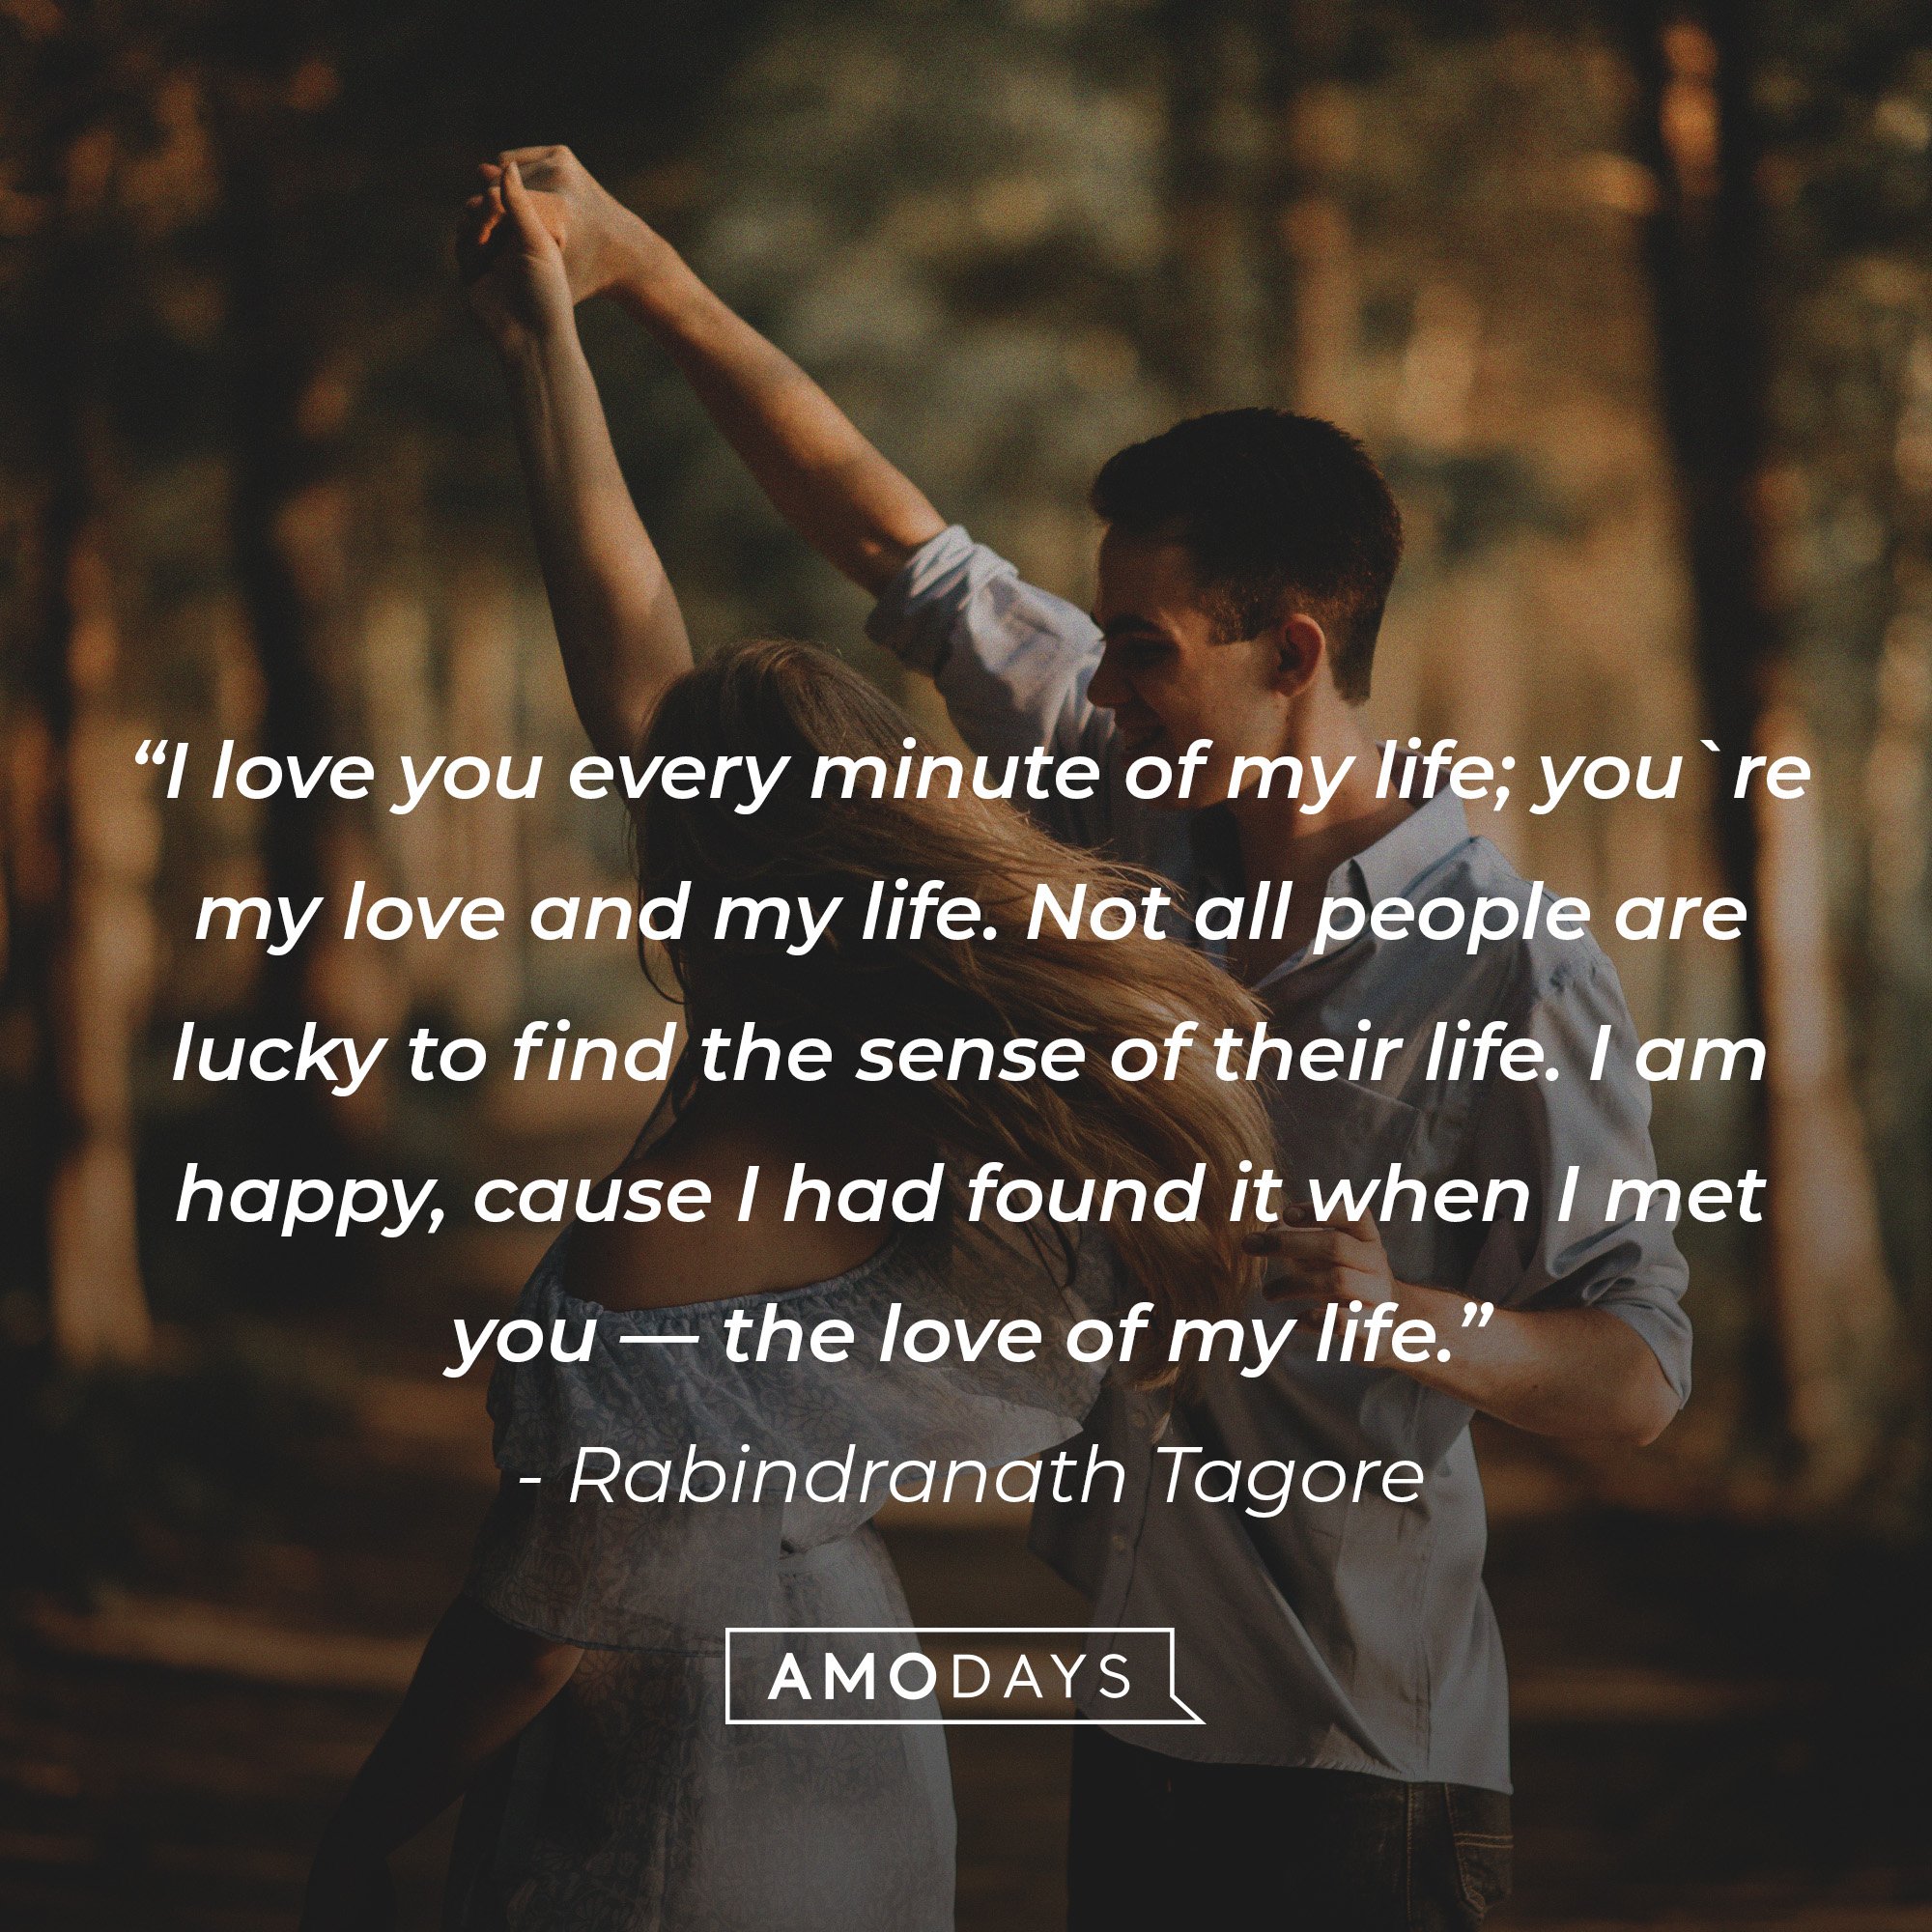 Rabindranath Tagore's quote: “I love you every minute of my life; you`re my love and my life. Not all people are lucky to find the sense of their life. I am happy, cause I had found it when I met you — the love of my life.” | Image: AmoDays